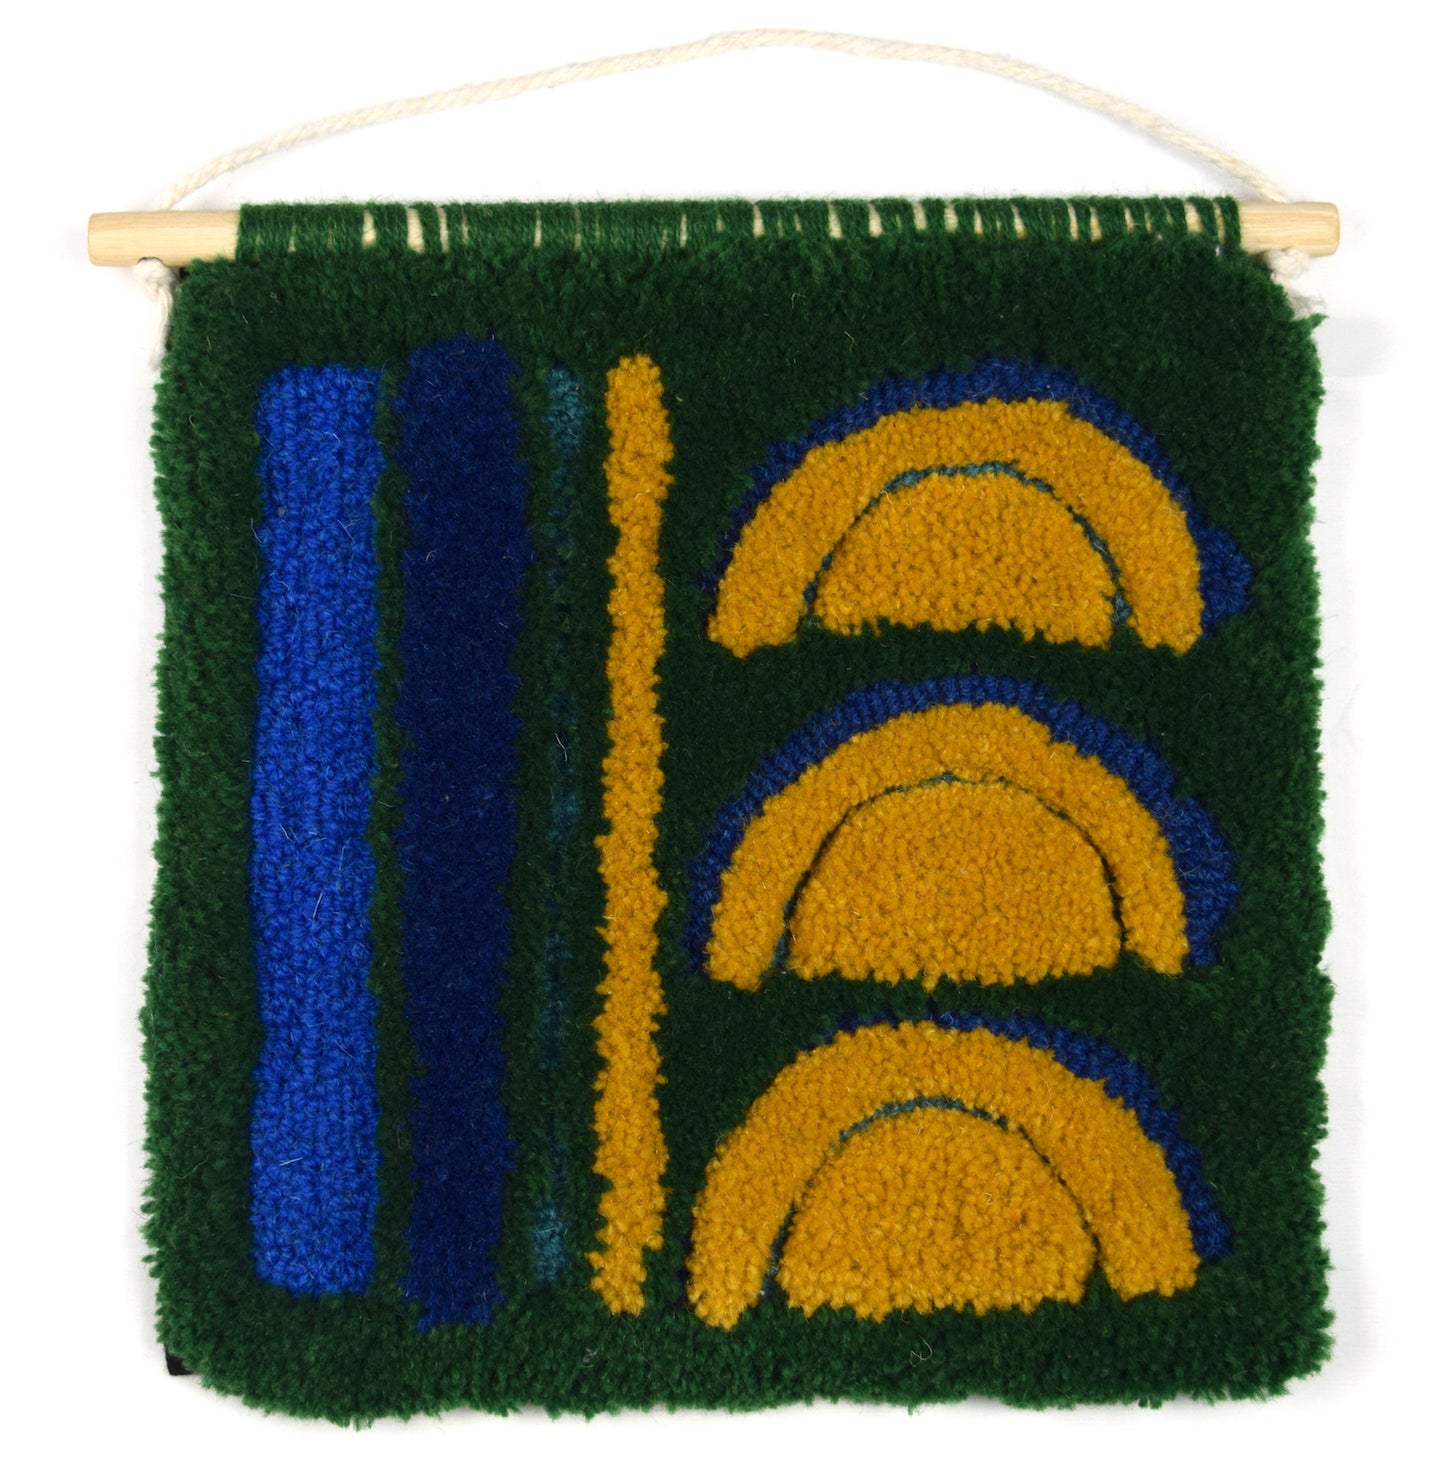 Green, Blue and Mustard - Hand Tufted Wall Hanging in a loop and cut pile using reclaimed yarns.